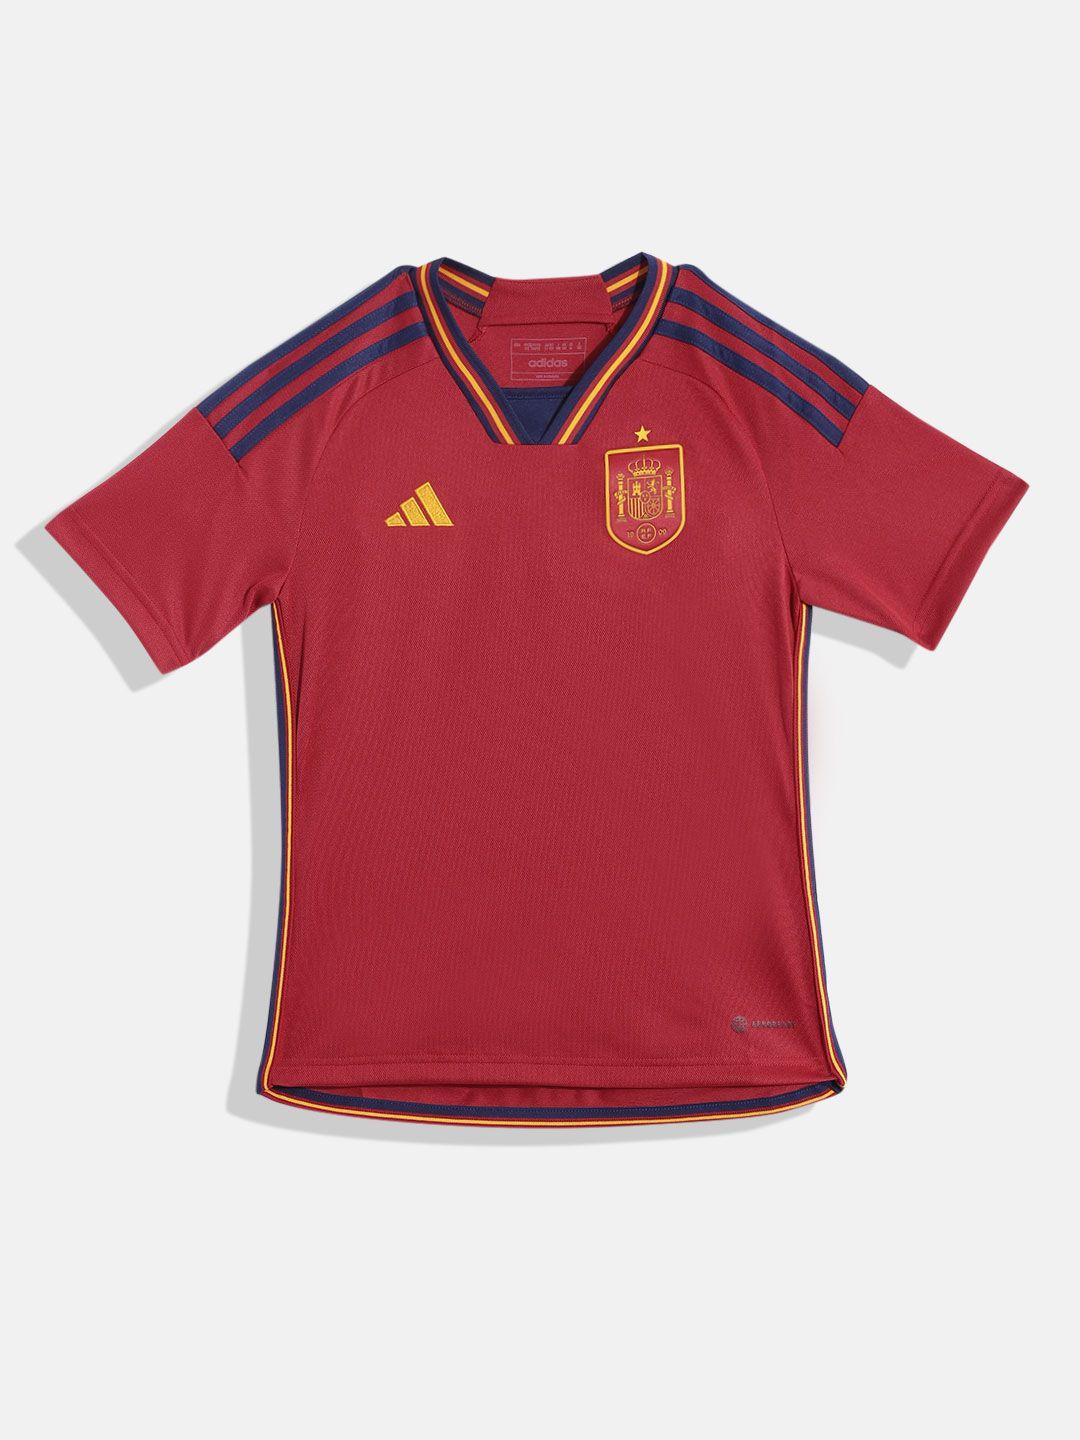 adidas kids red & navy blue v-neck spain 22 home jersery fifa hf1408 t-shirt